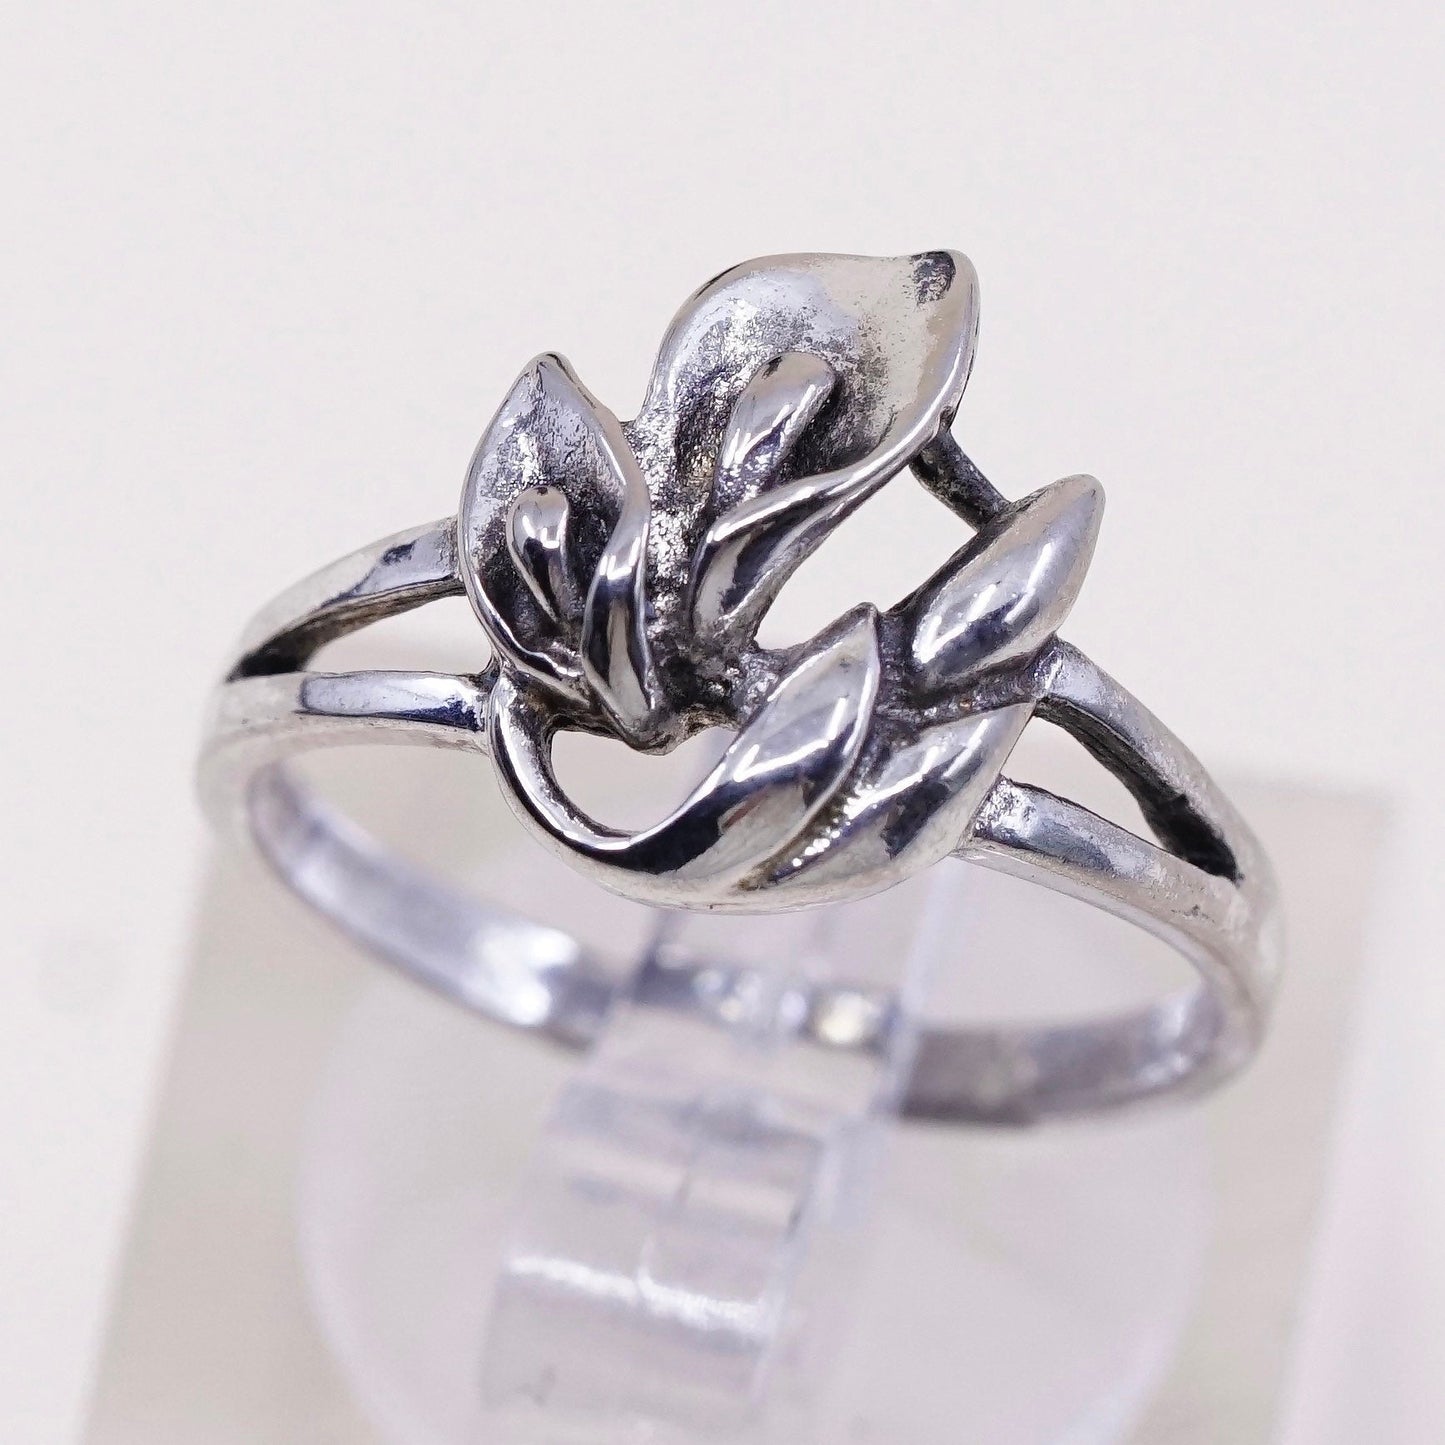 Size 6, vintage Sterling 925 silver handmade ring with lily flower